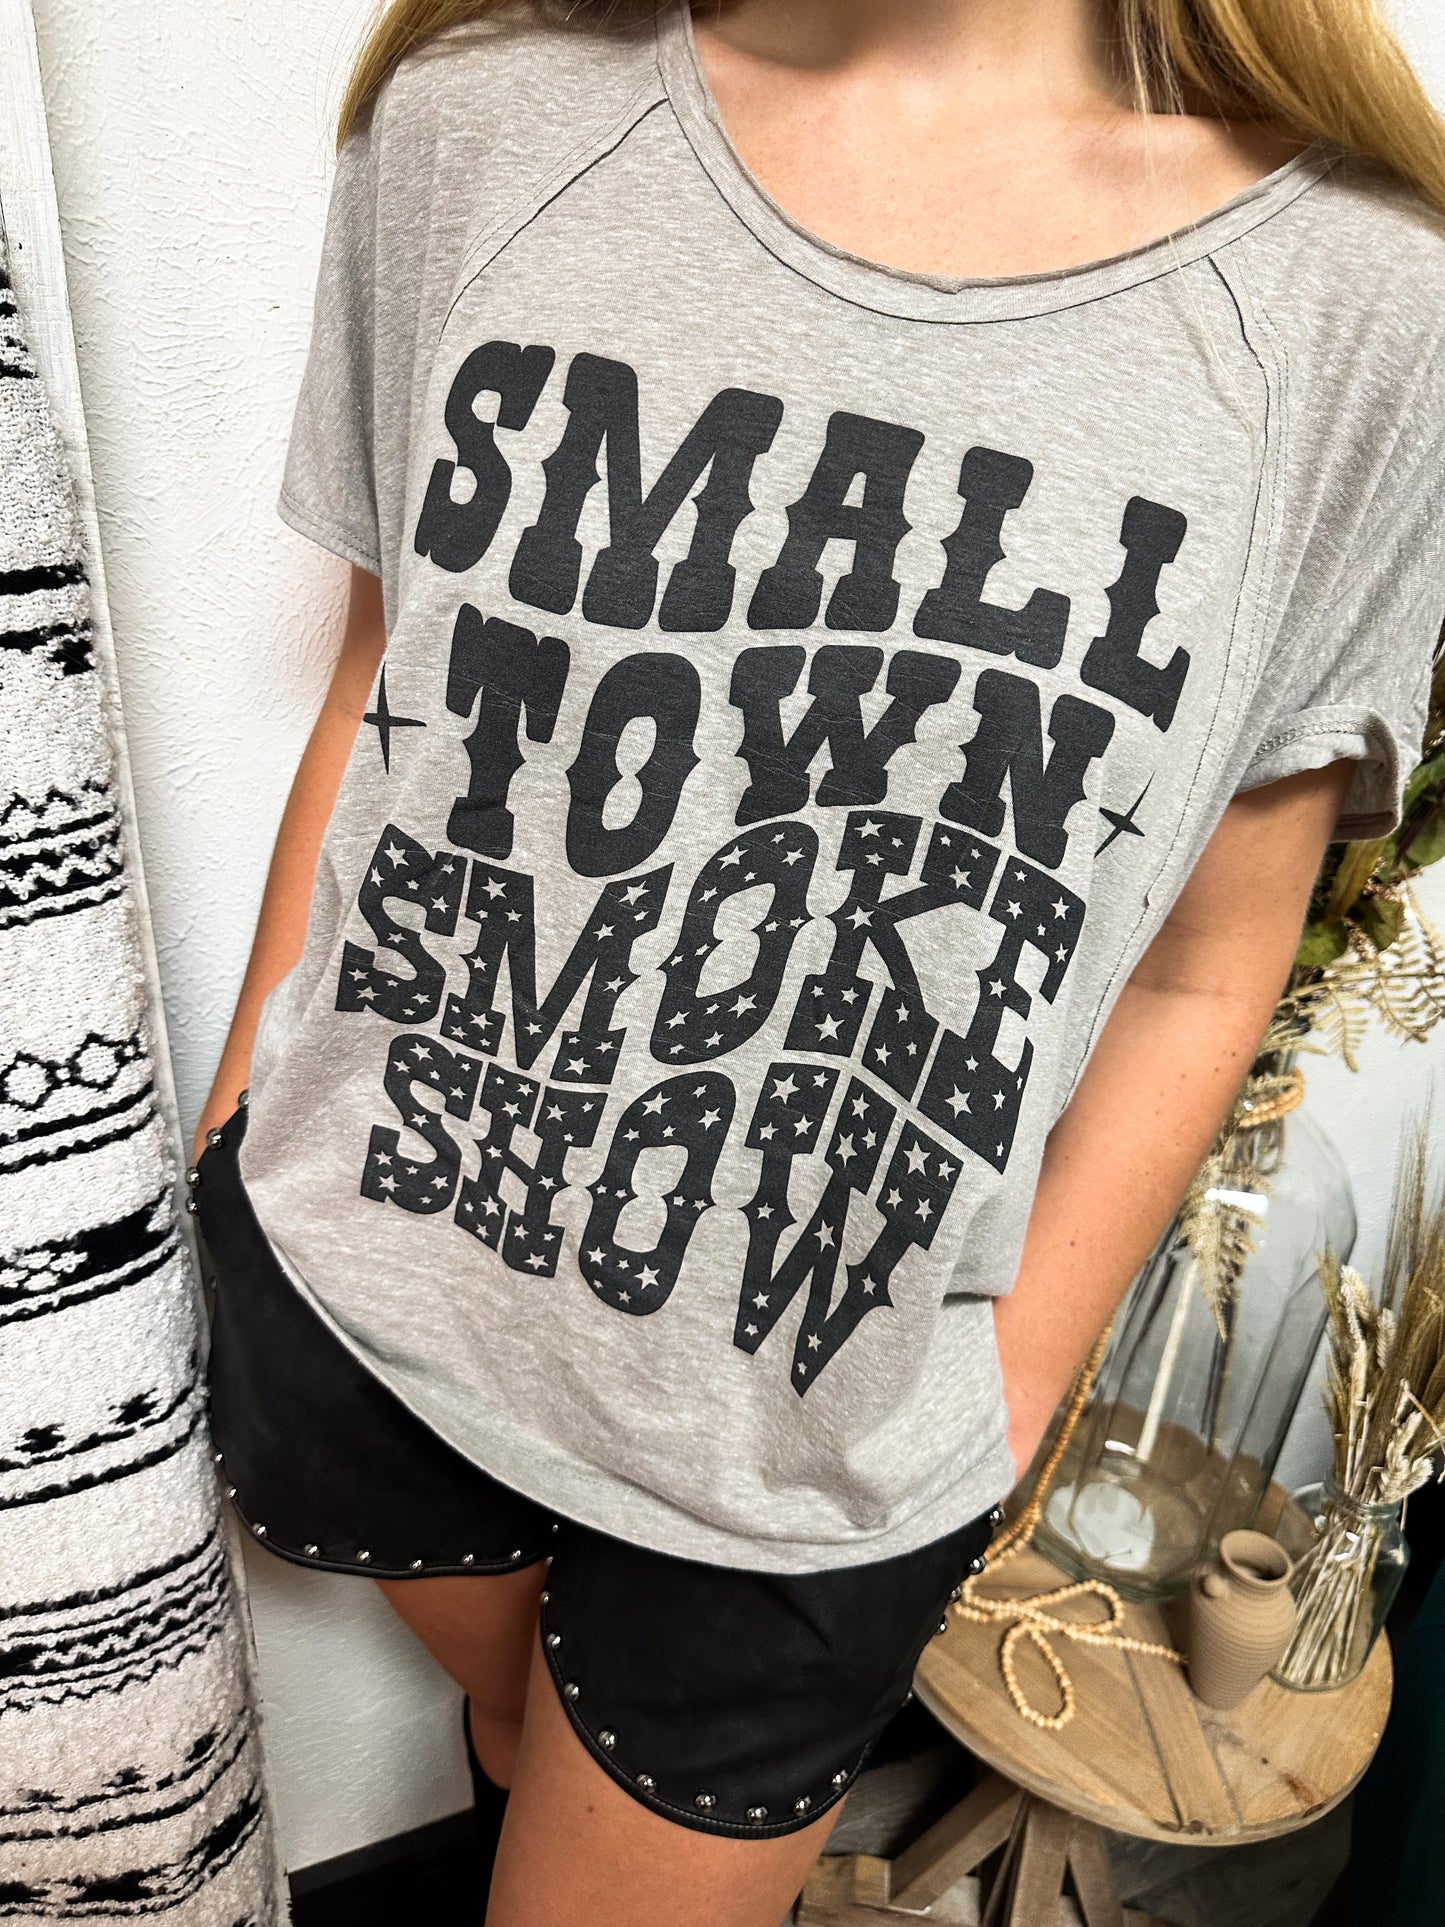 Small Town Smoke Show Graphic Tee, Grey